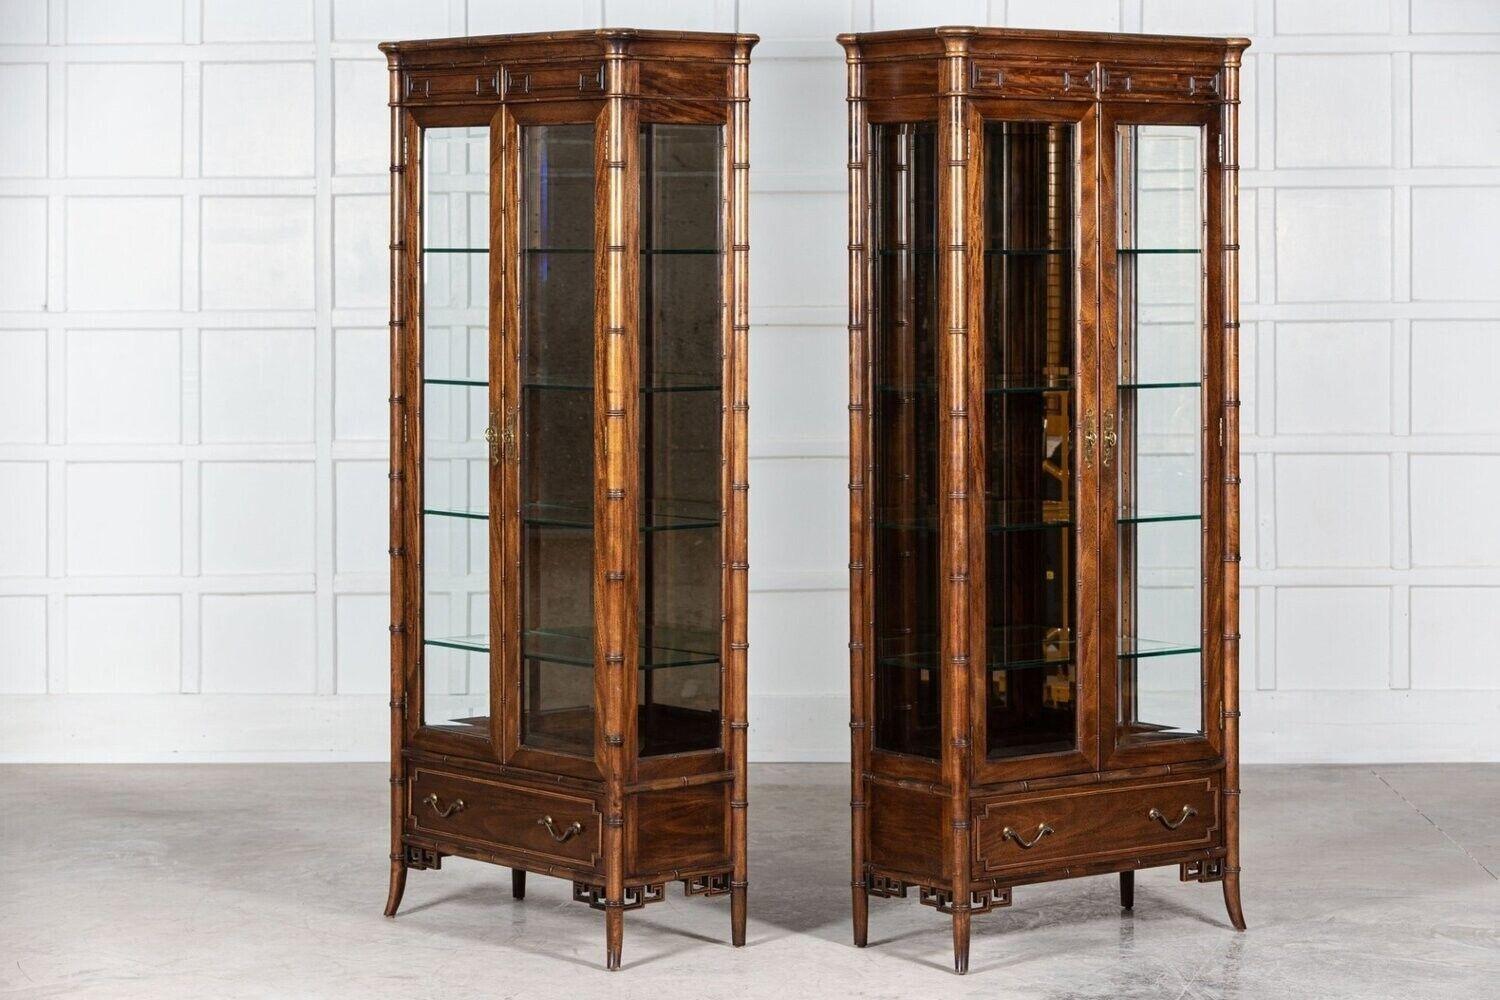 Mid 20thC
Pair Walnut Chippendale Influenced Faux Bamboo Glazed Display Cabinets
Excellent quality and form
Price is each x 1 left
sku 1193
W90 x D43 x H205cm